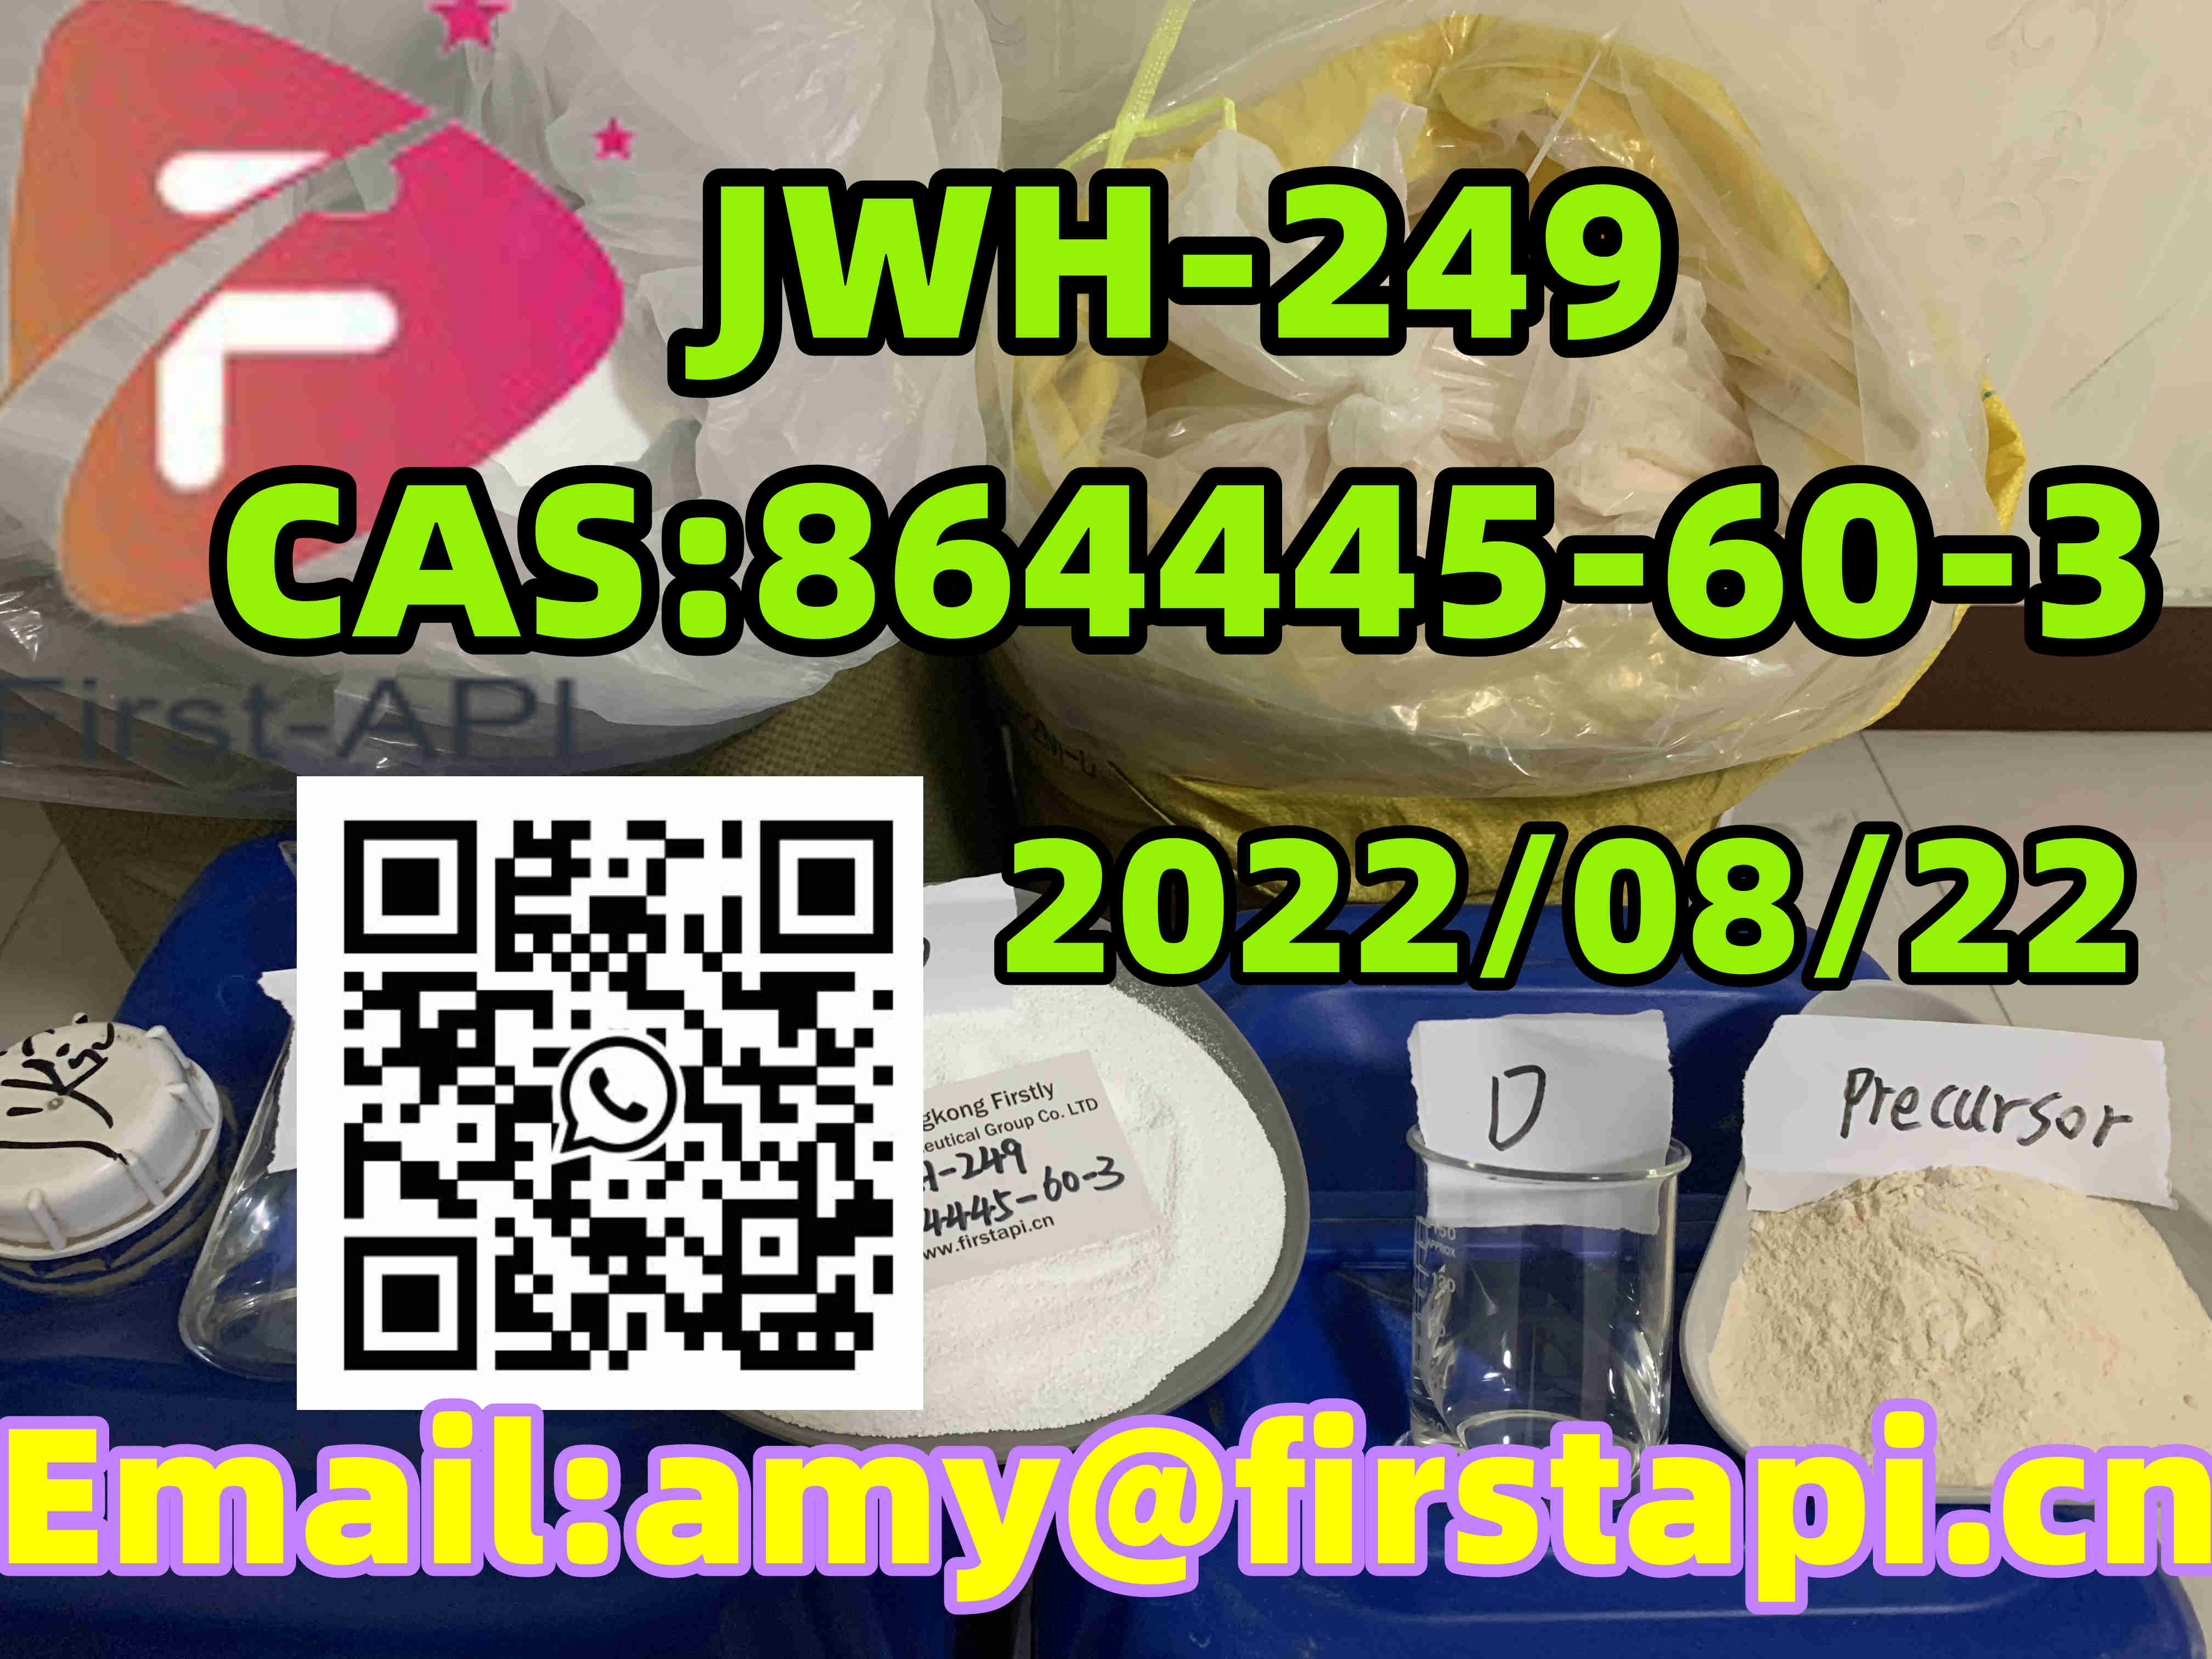 CAS:864445-60-3,JWH-249,high quality,low price,fast delivery - photo